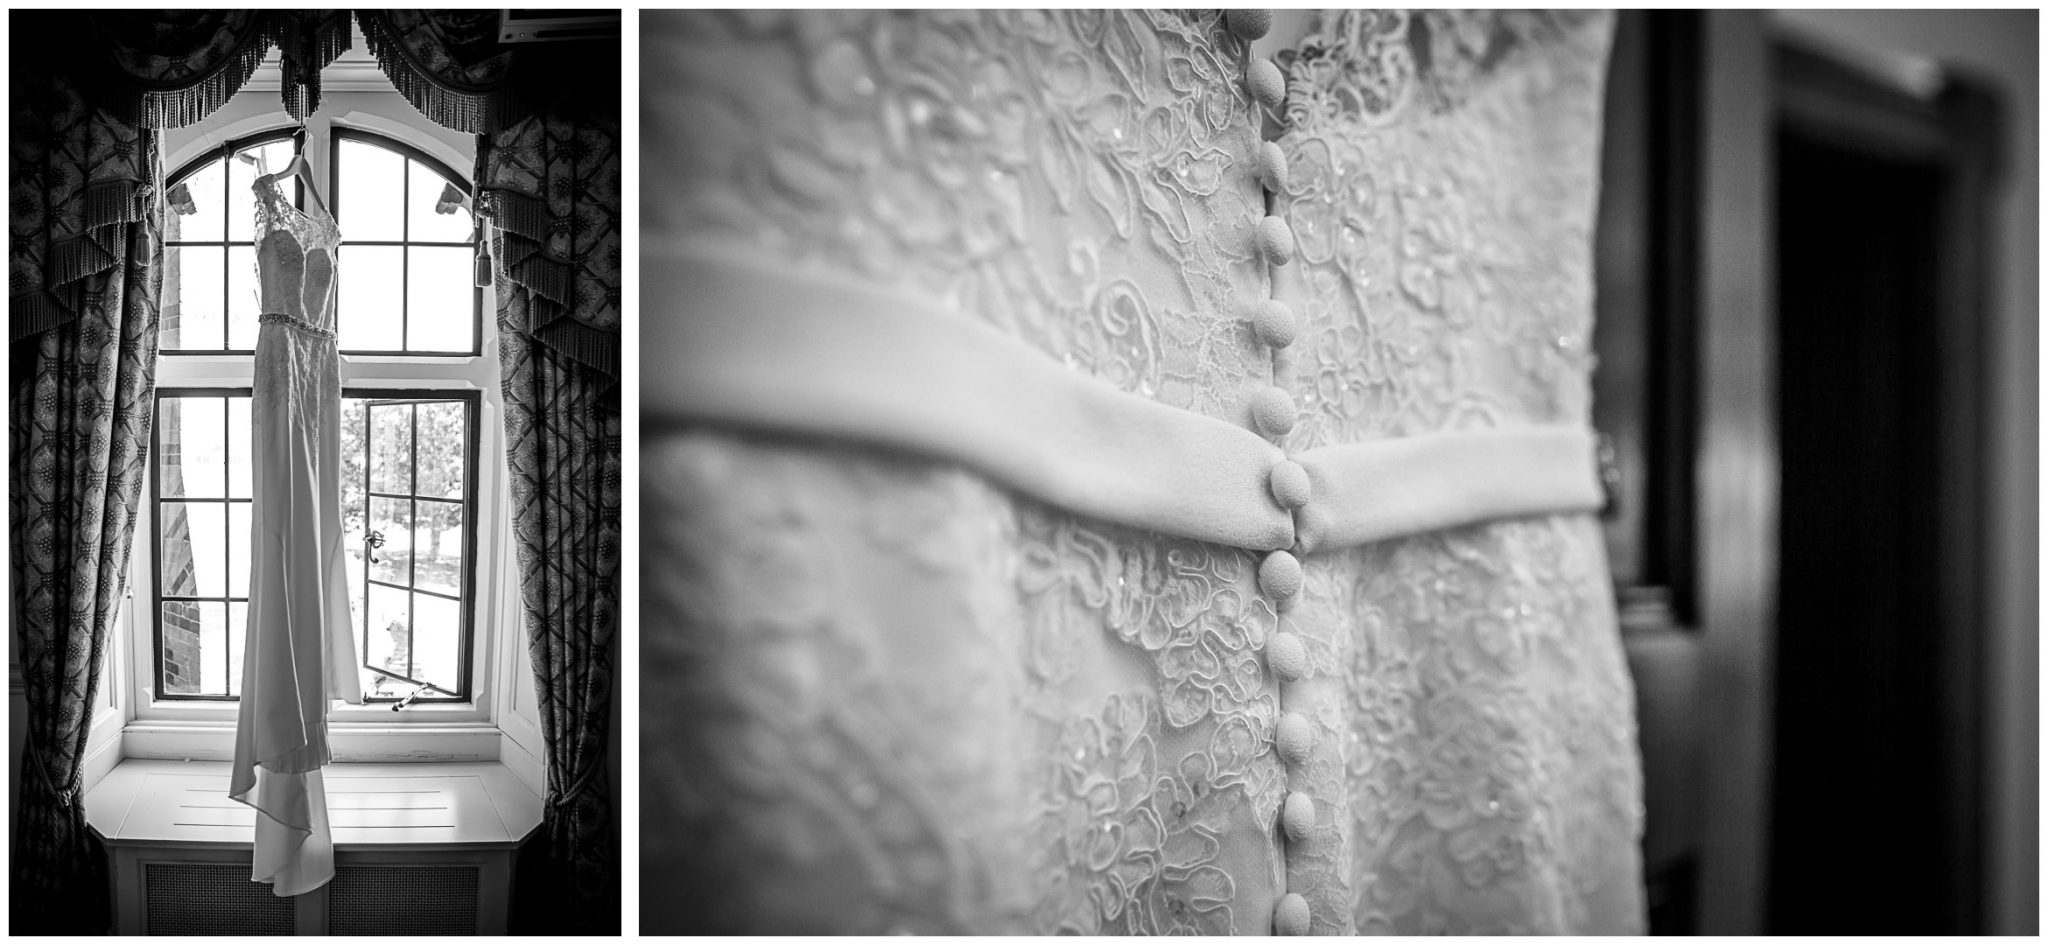 Dress hanging, framed by a window at The Elvetham Hotel